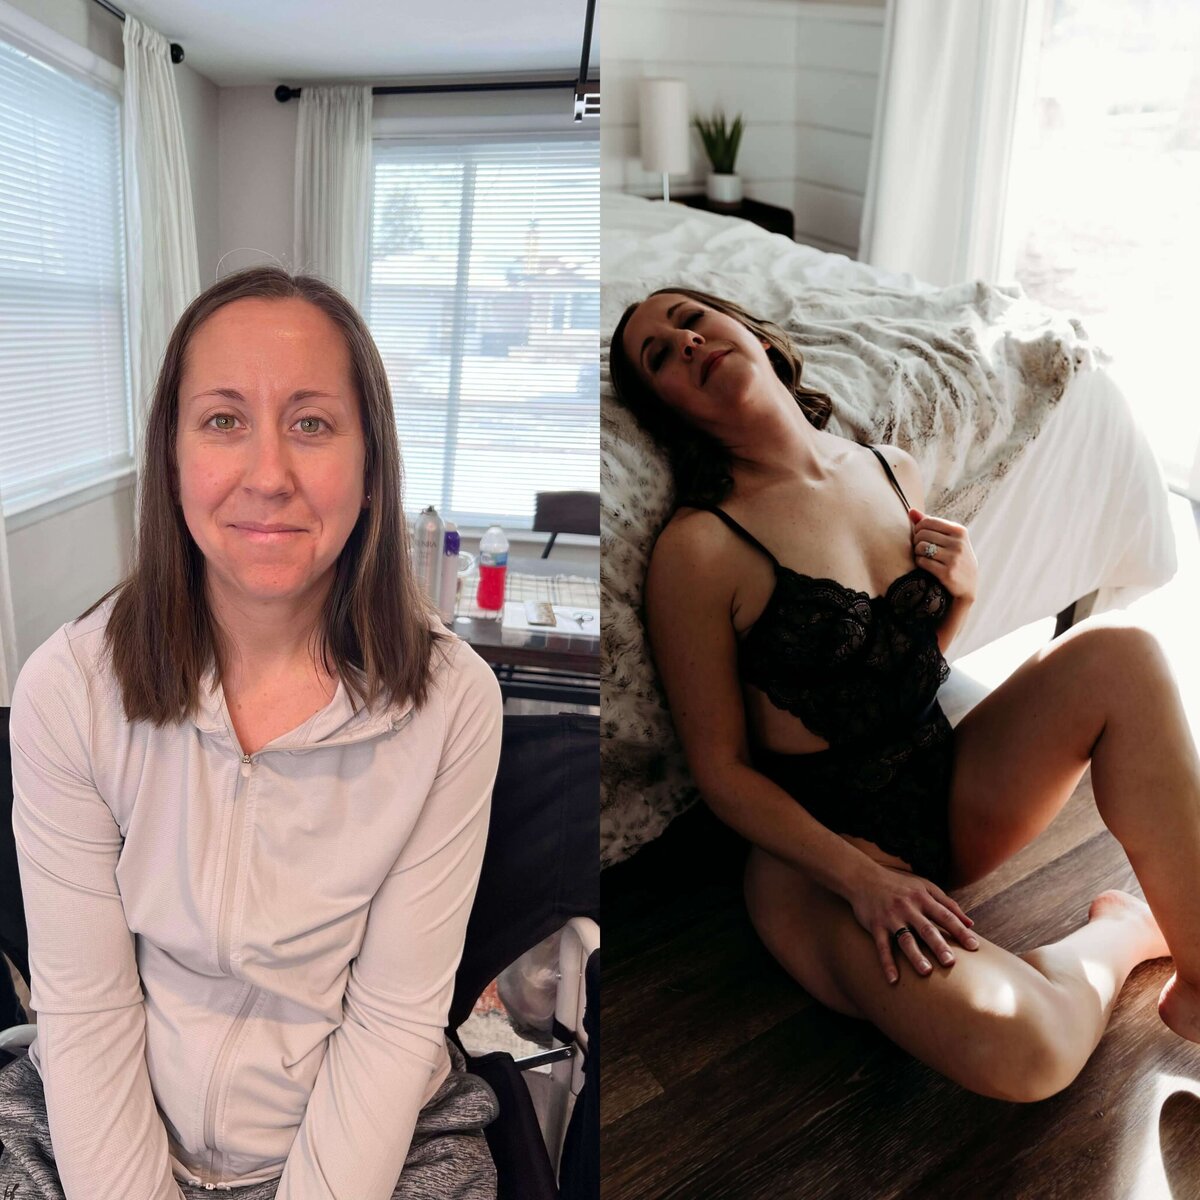 example image of a boudoir photo client before her session and during